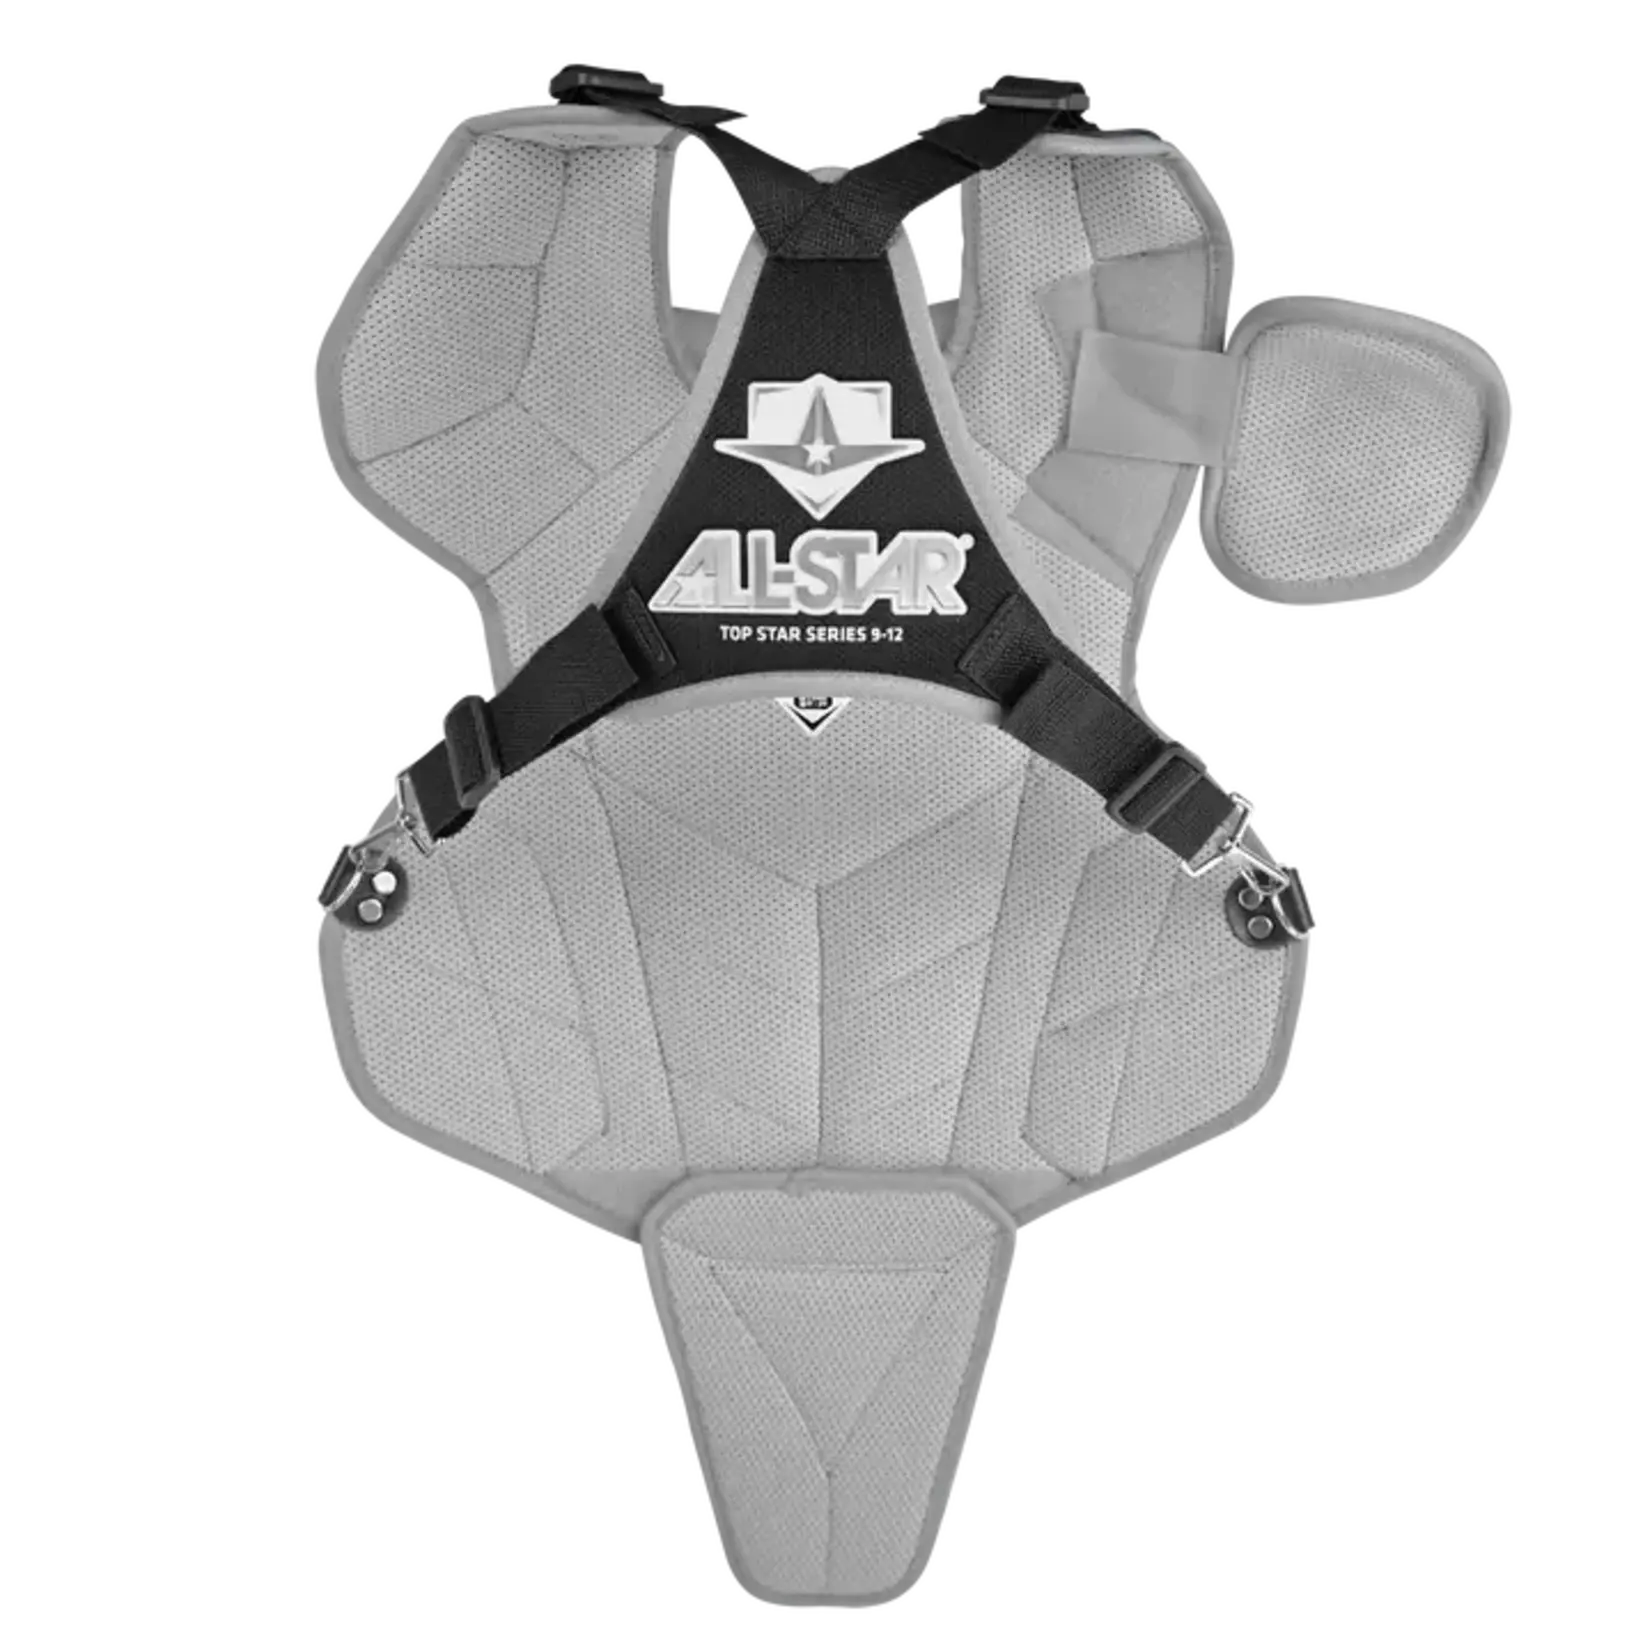 All-Star All Star Top Star 9-12 Chest Protector